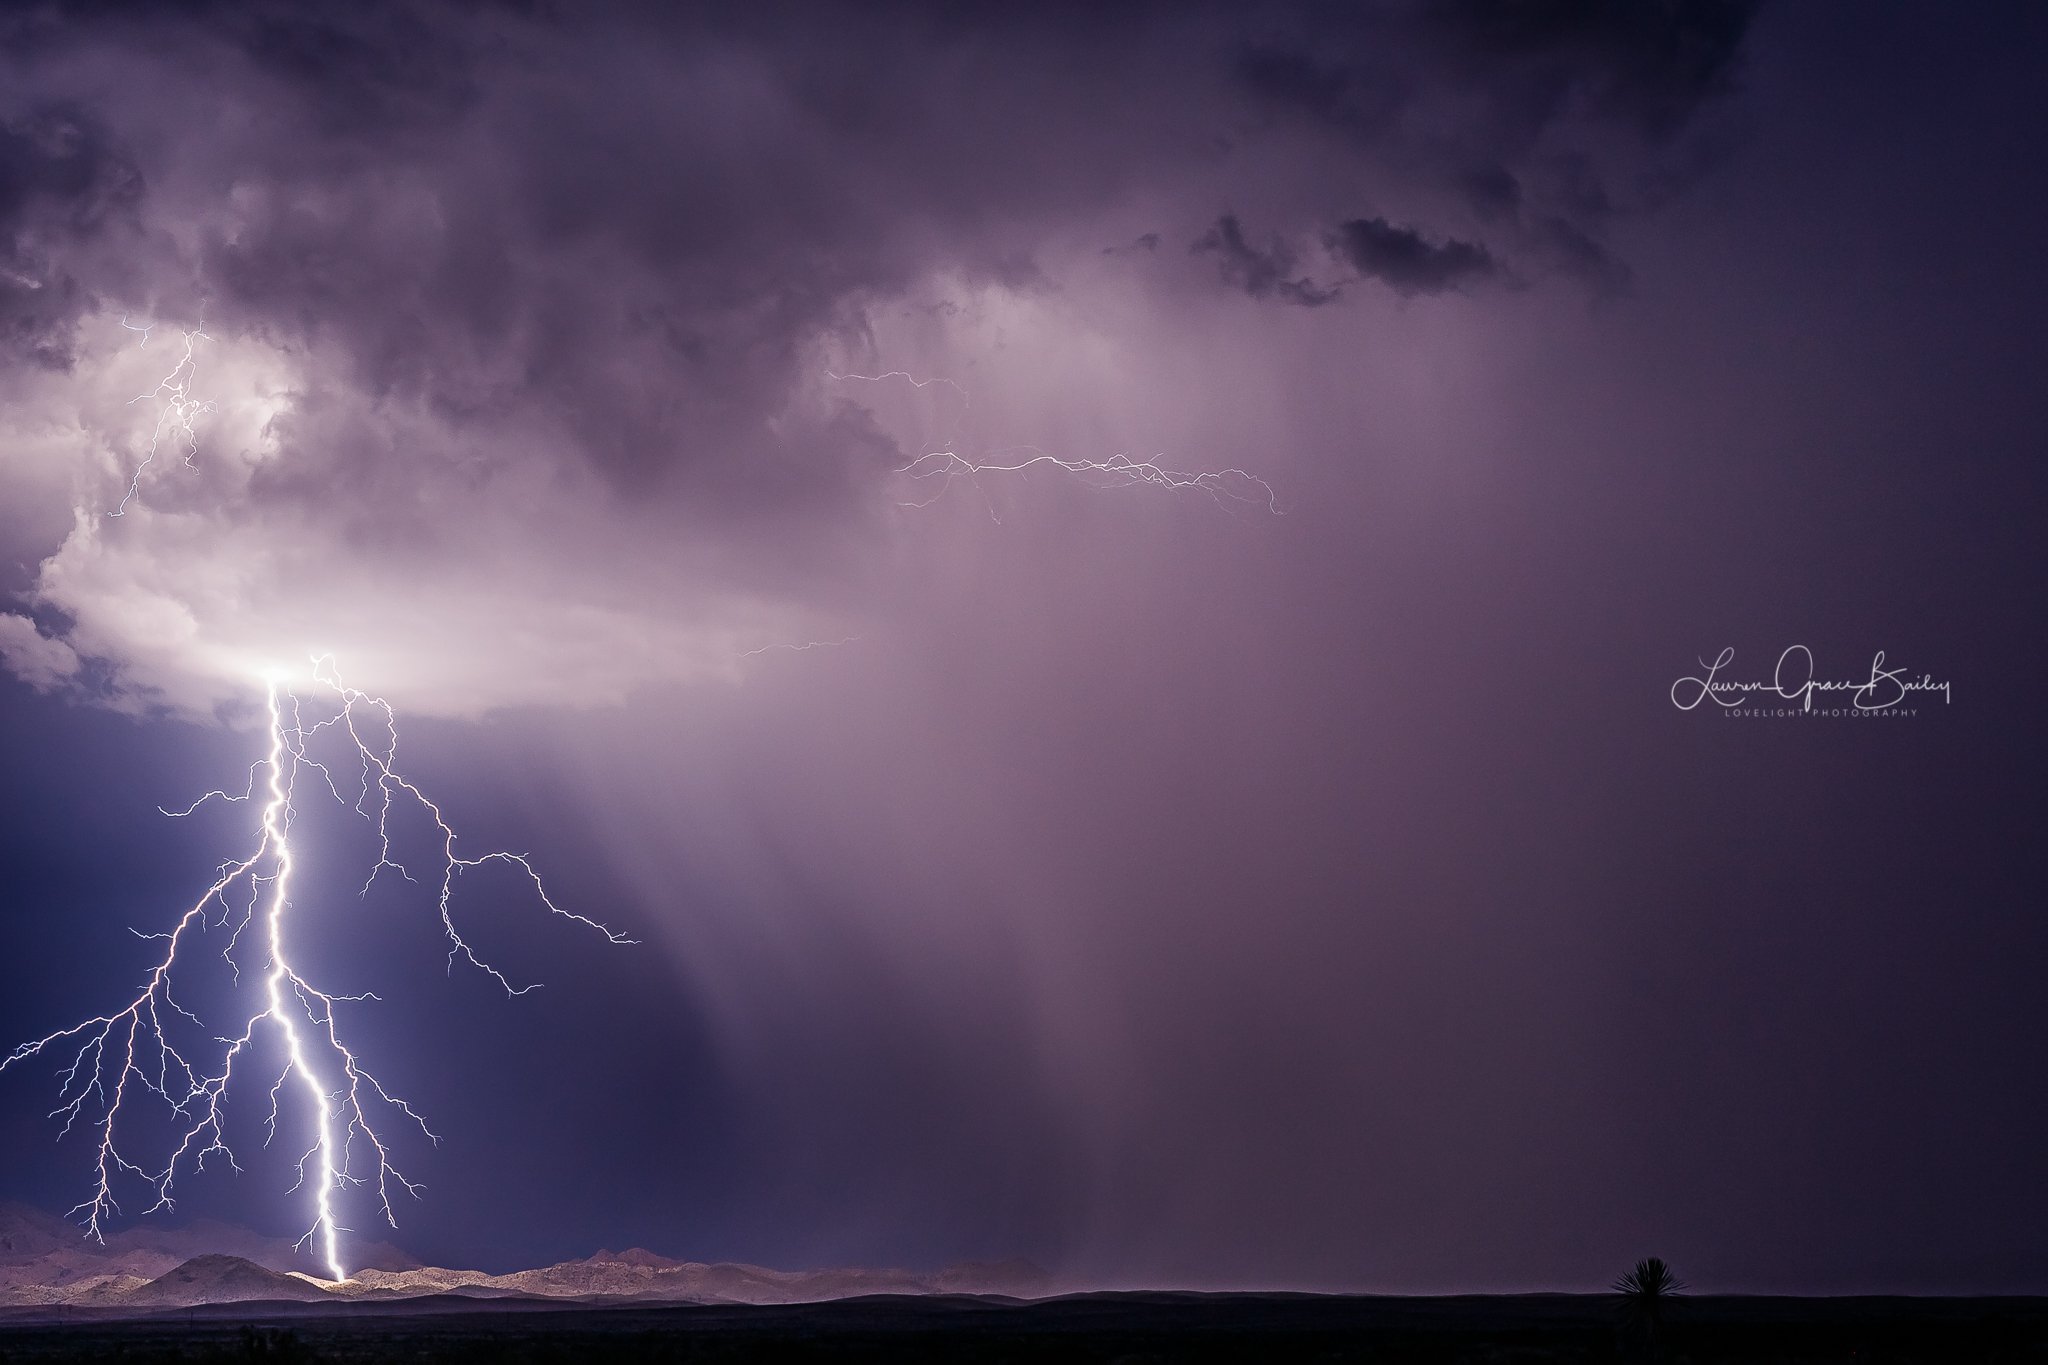 The area east and west of Willcox, Arizona was the place to beat for lightning by Lori Grace Bailey @lorigraceaz